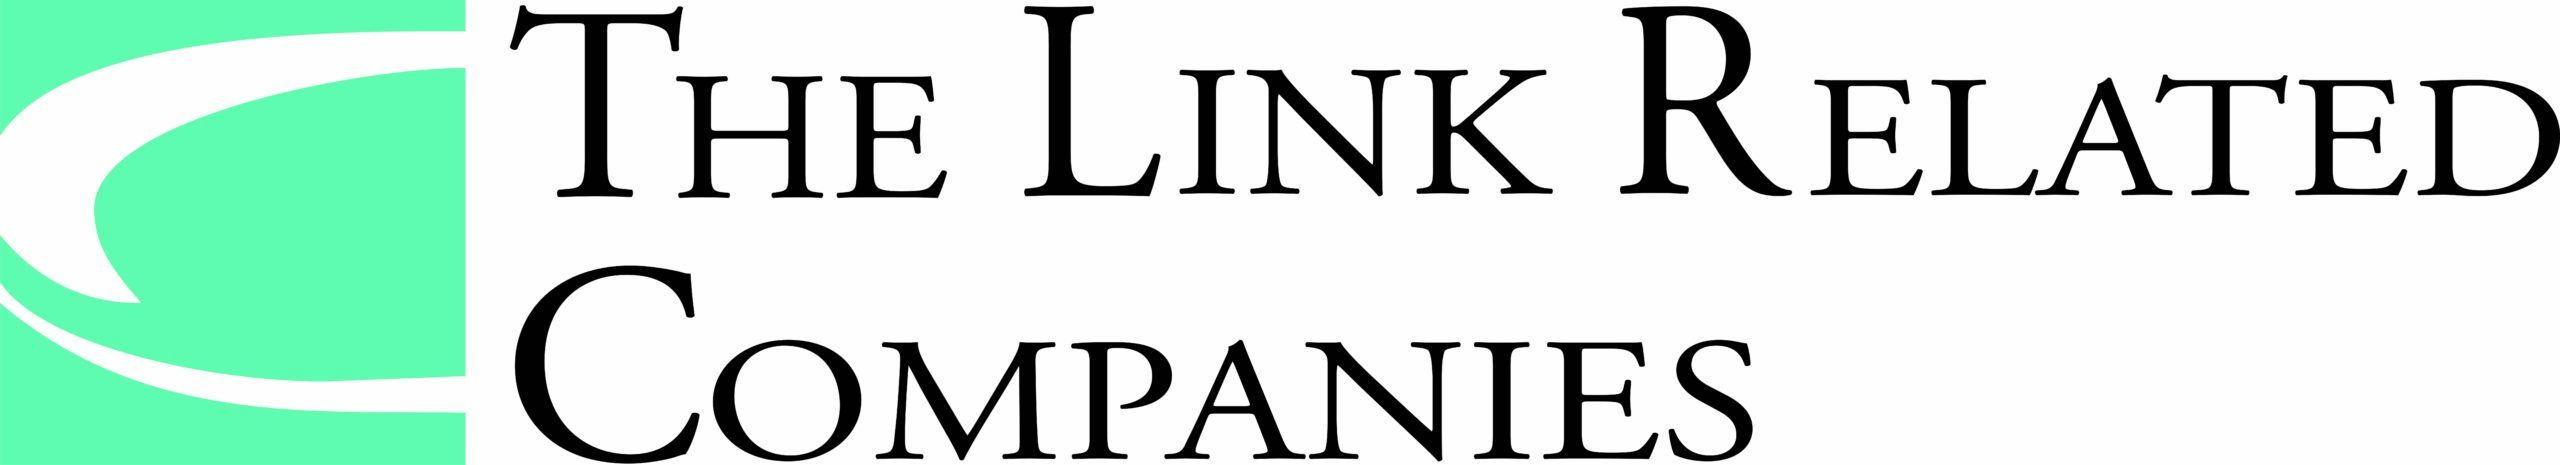 The Link Related Companies